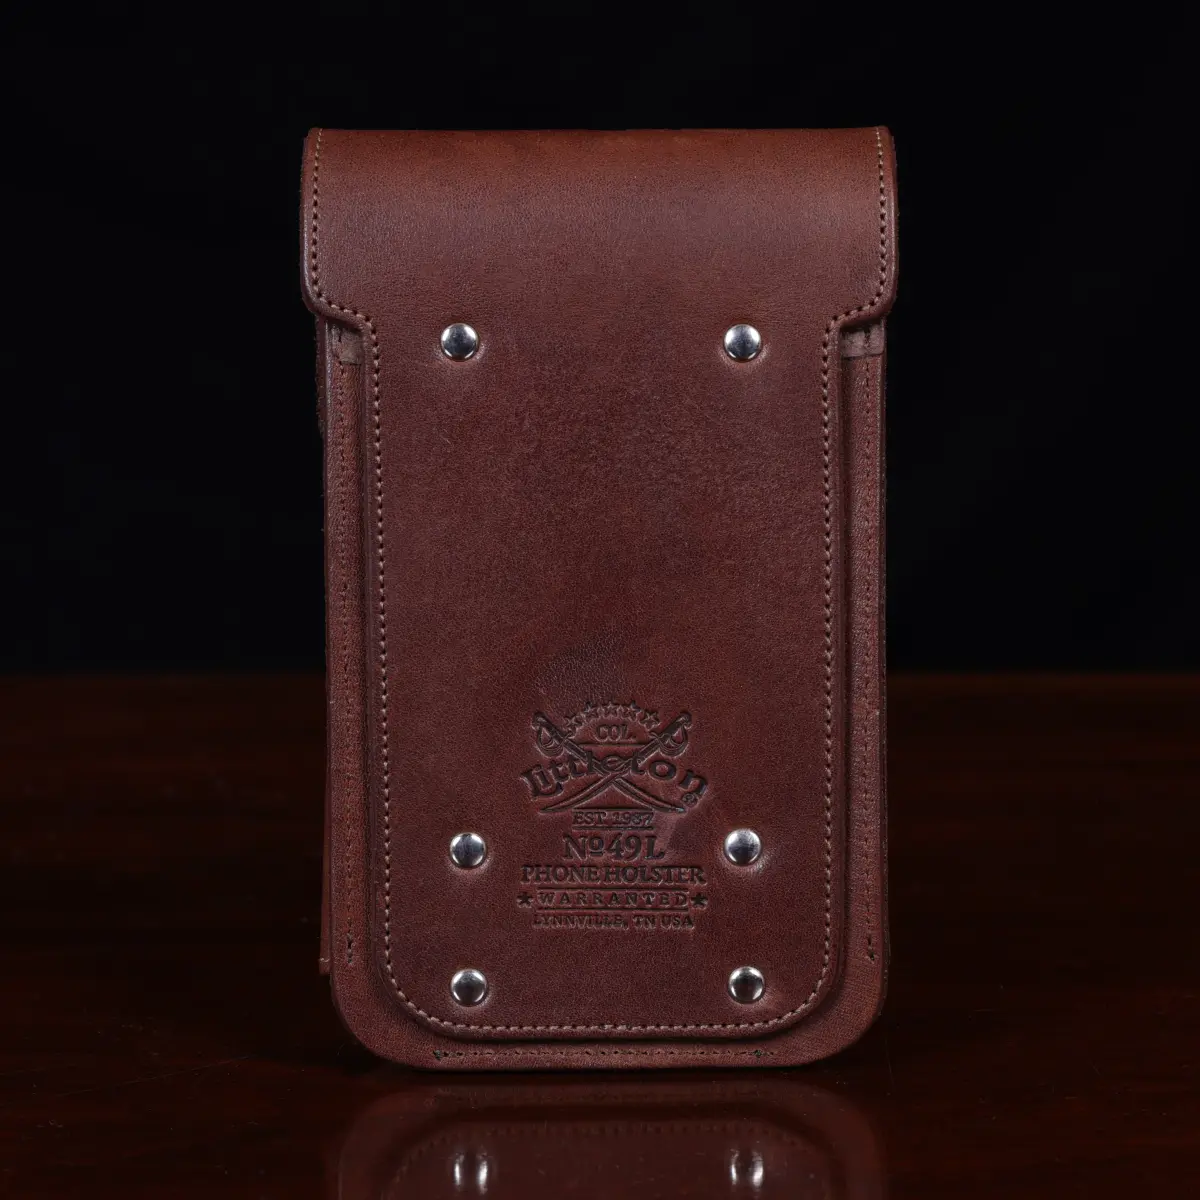 LEATHER PHONE POUCH in brown